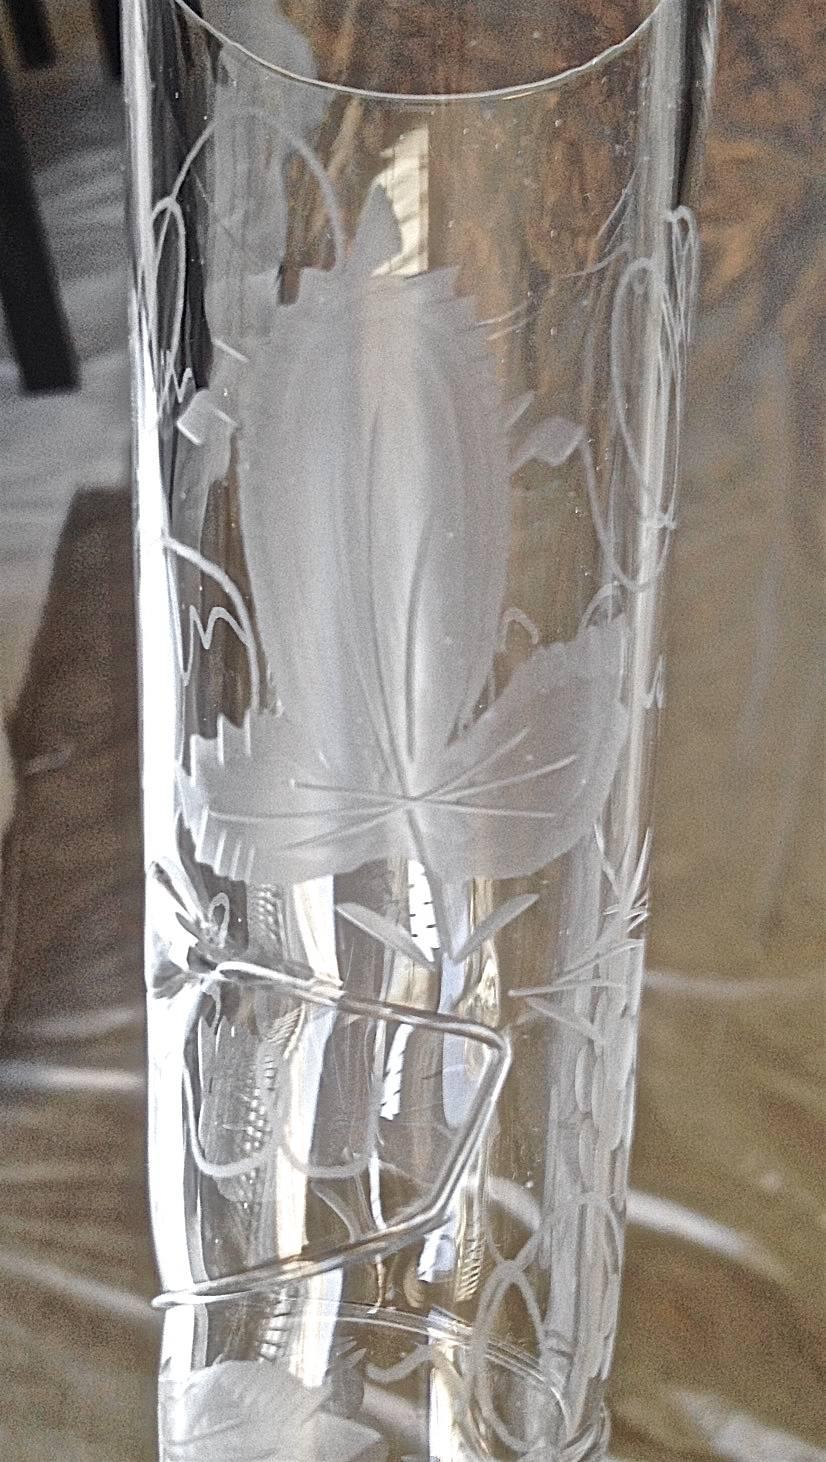 Rare and exciting set of 12 extra tall skinny champagne flutes beautifully etched and with applied glass swirling down. The quality of the etching is the best, and the precise application of the glass is mind blowing. Absolutely fantastic! In